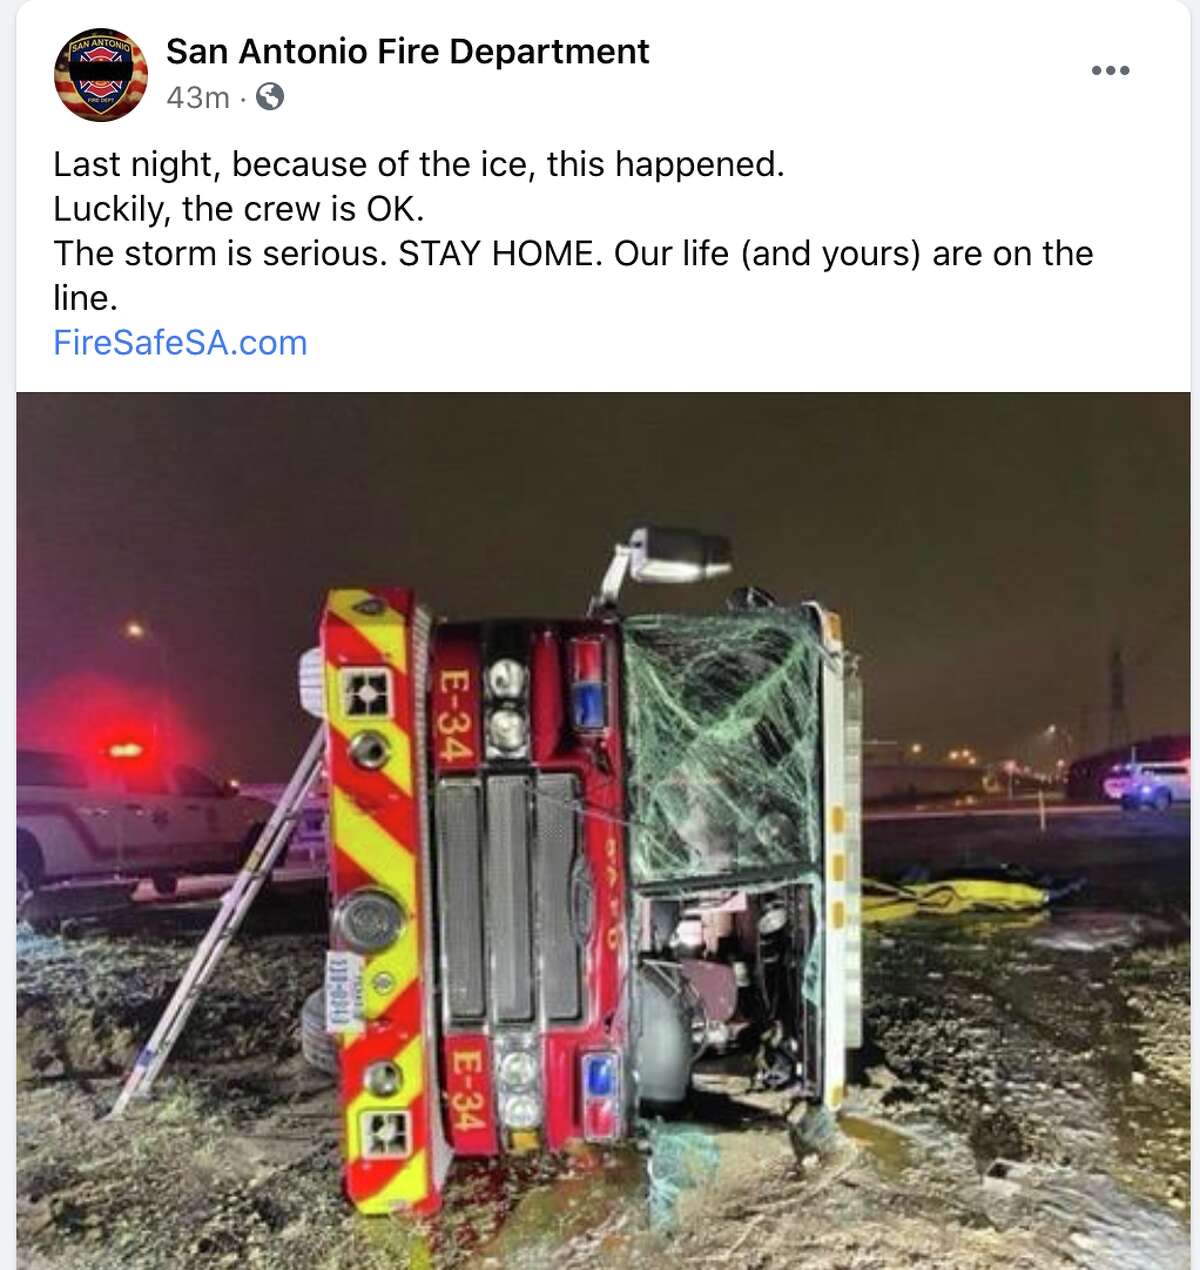 The San Antonio Fire Department shared the image of the truck that slid into an embankment.